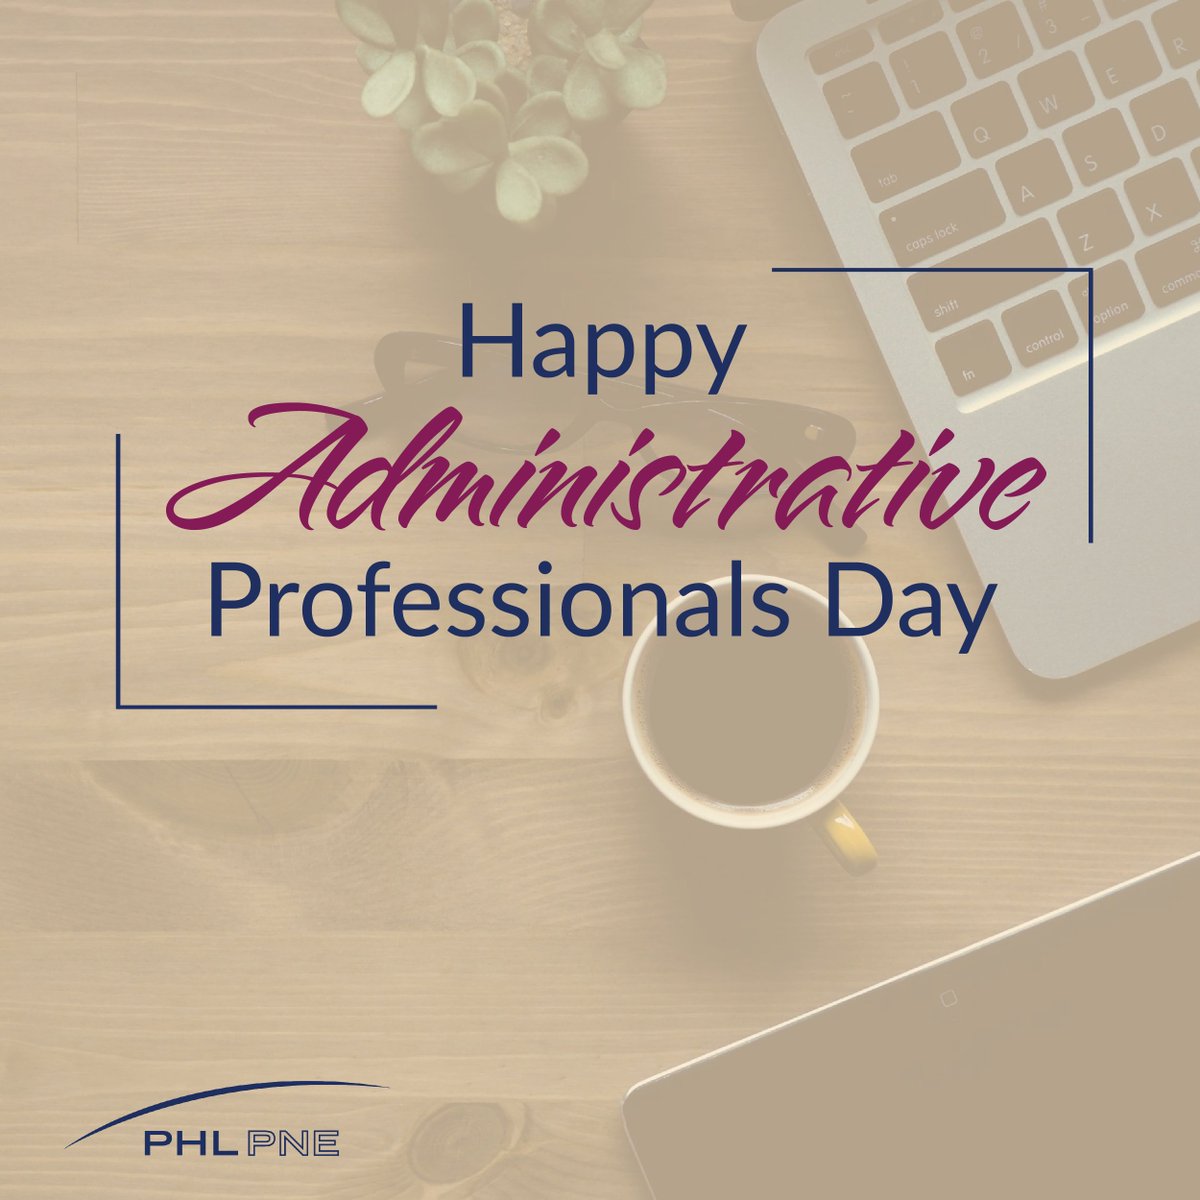 Today we celebrate the dedicated #PHLAirport and #PNEAirport administrative professionals working behind the scenes every day to keep information flowing smoothly and efficiently. #HappyAdministrativeProfessionalsDay!